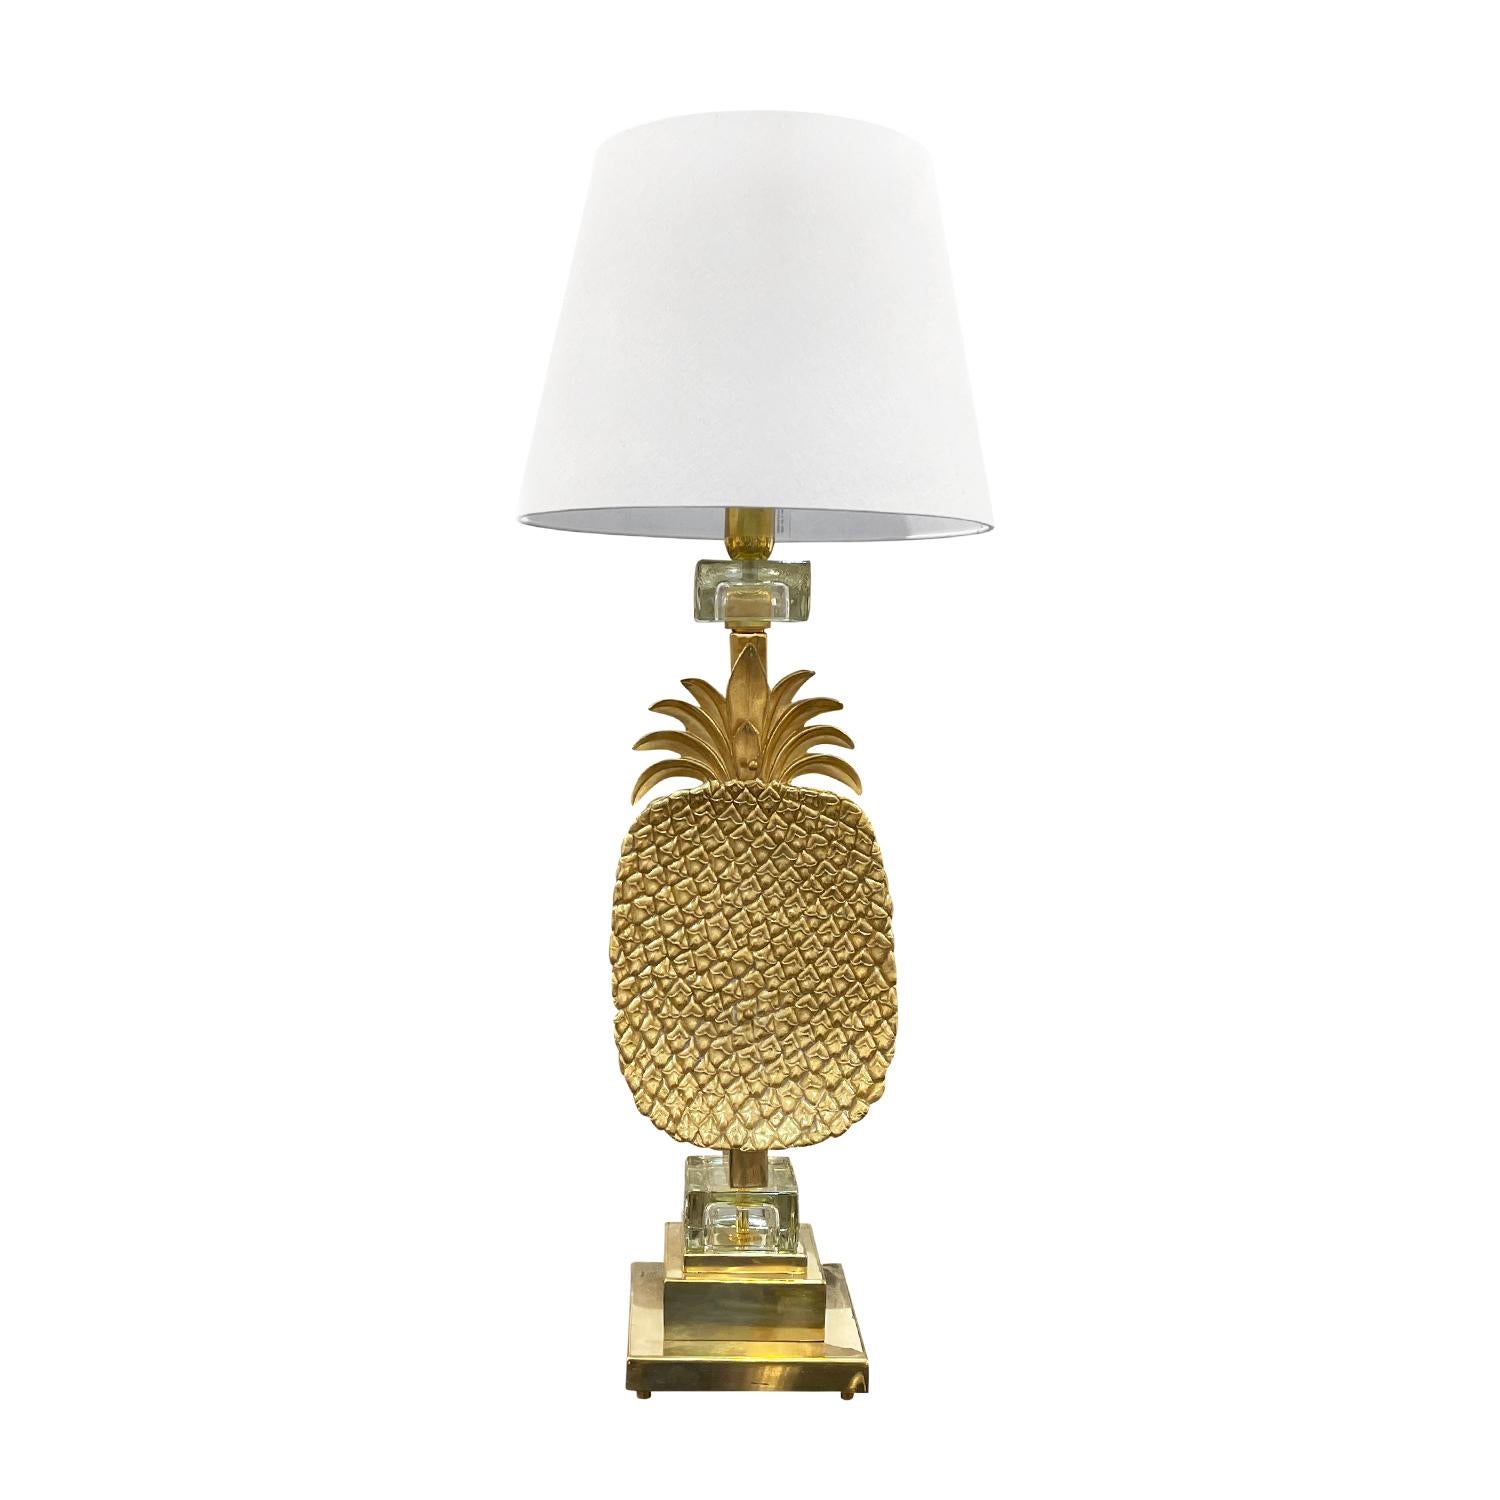 A vintage Mid-Century modern pair of Italian pineapple table lamps with a new beige round shade, made of hand crafted polished brass in good condition. The large lights are enhanced by two clear Murano glass blocks, featuring a single light socket.